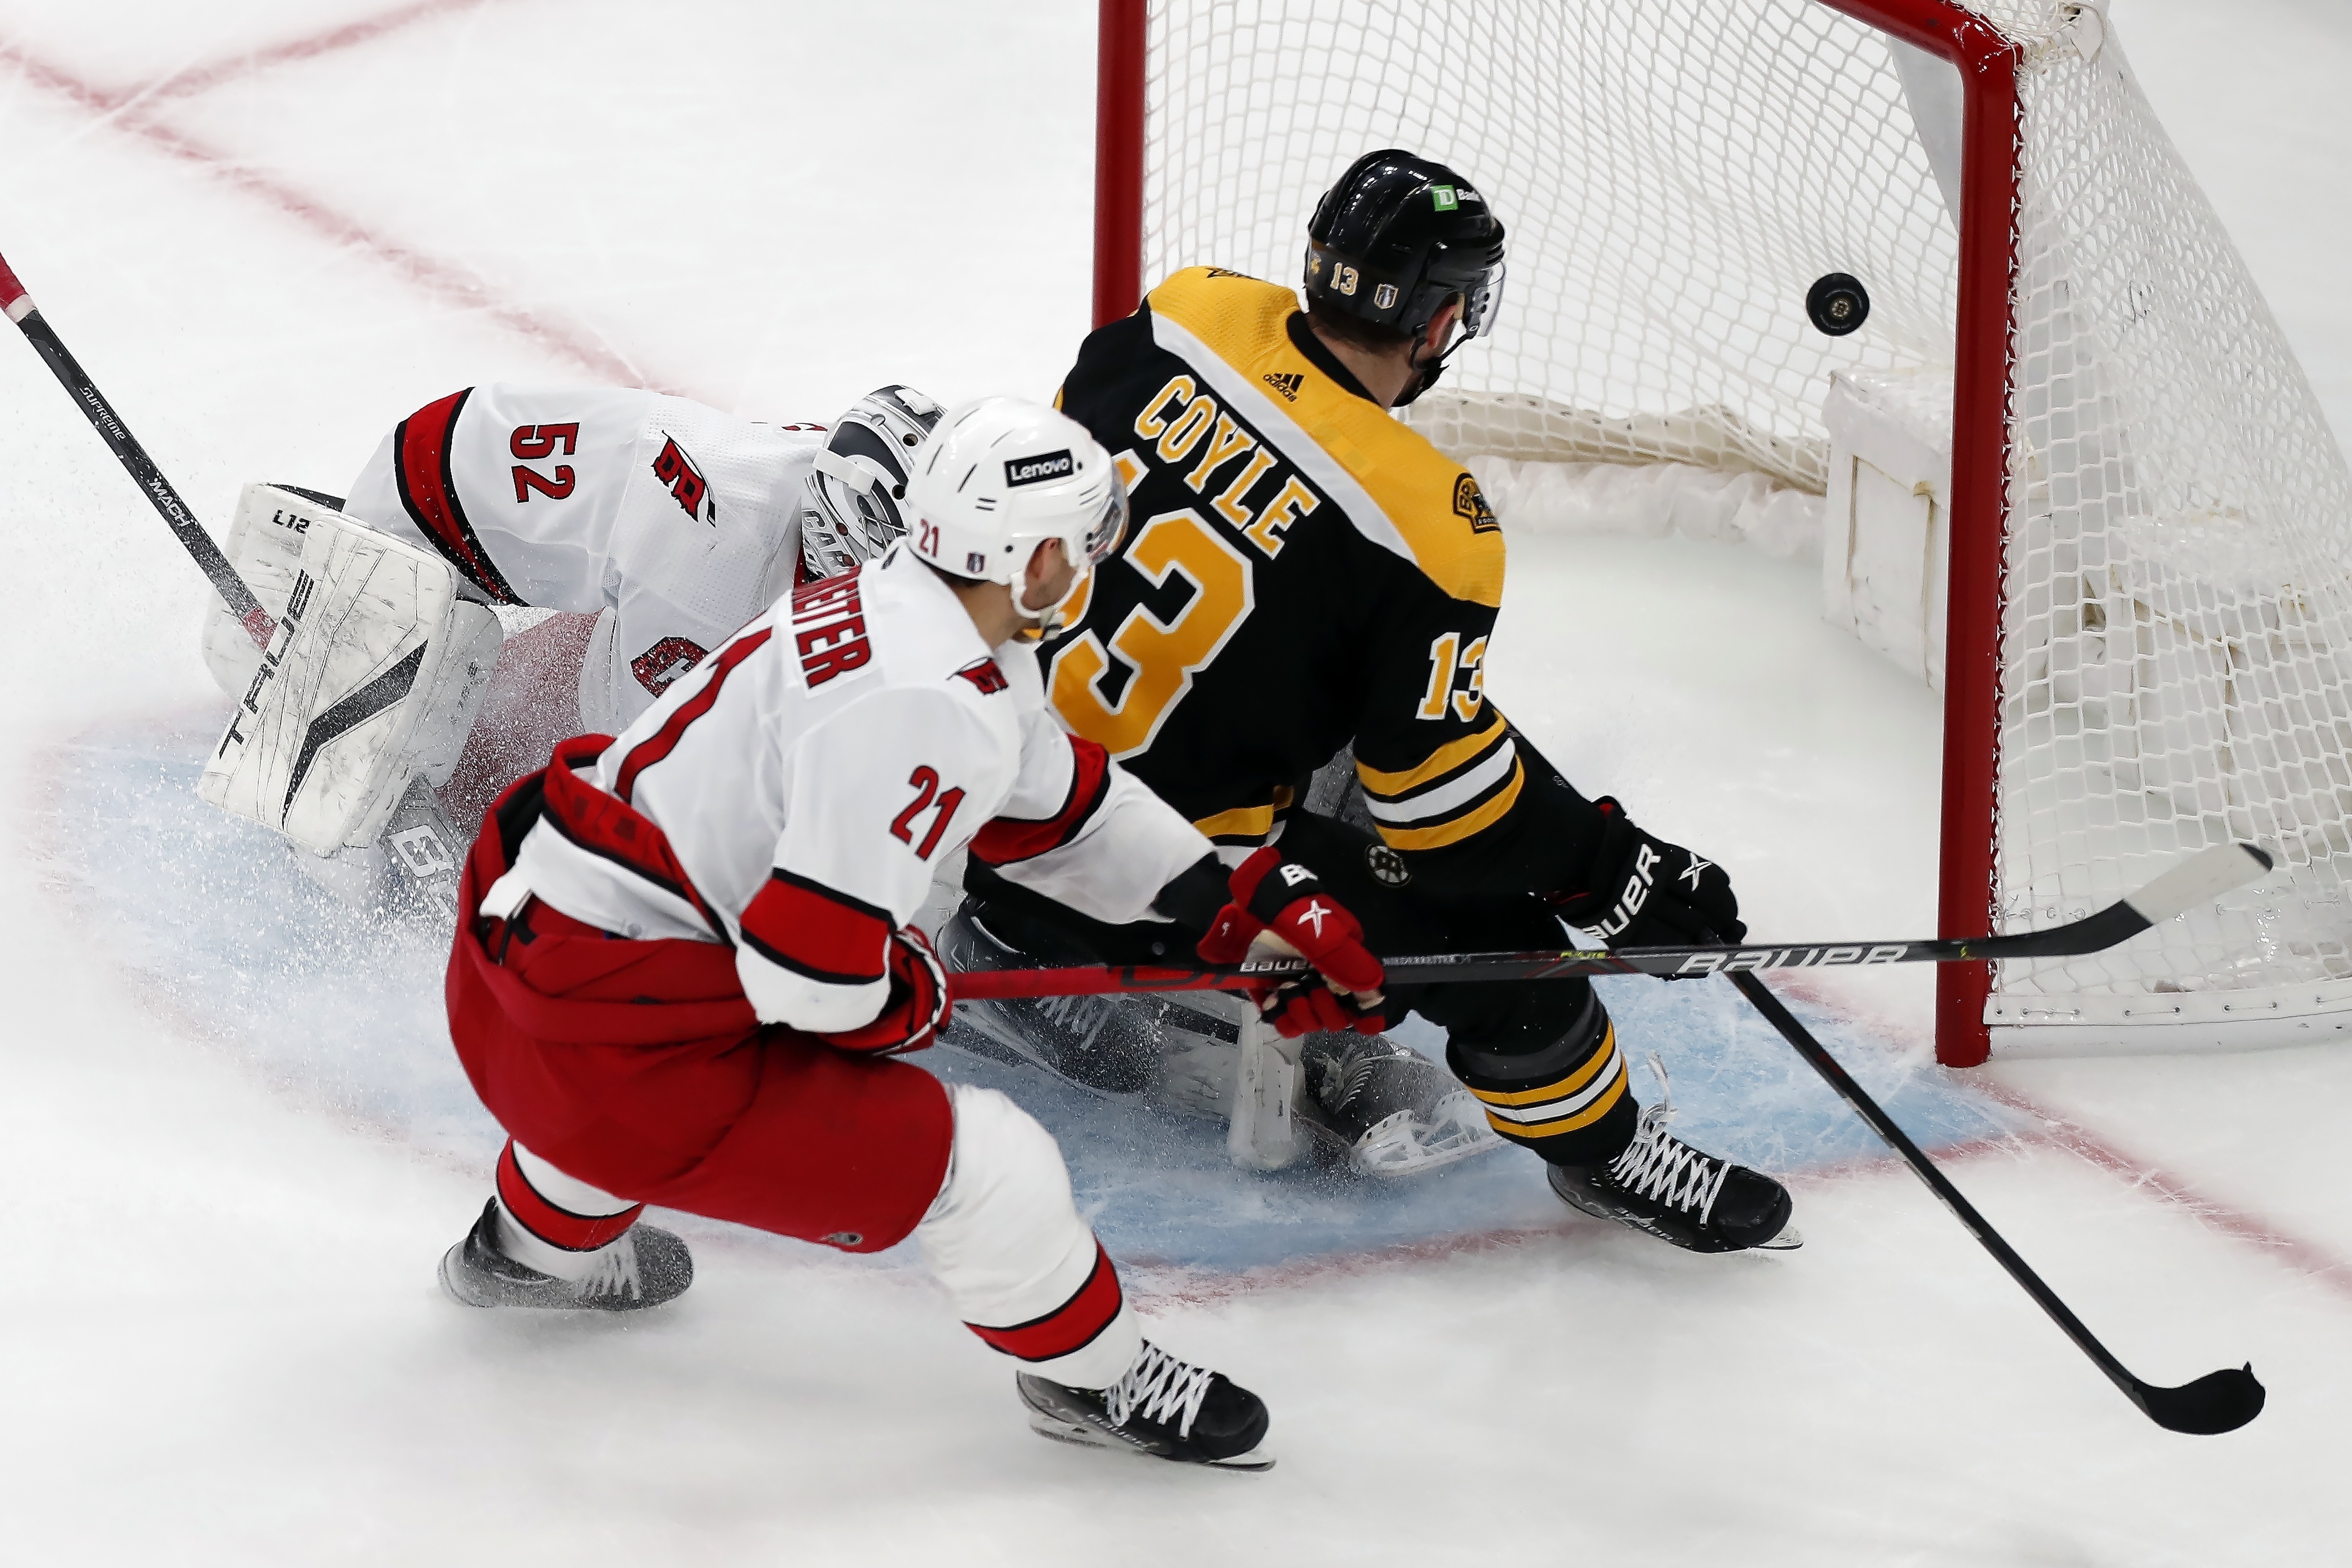 Coyle takes center stage for undermanned Bruins in Game 3 win